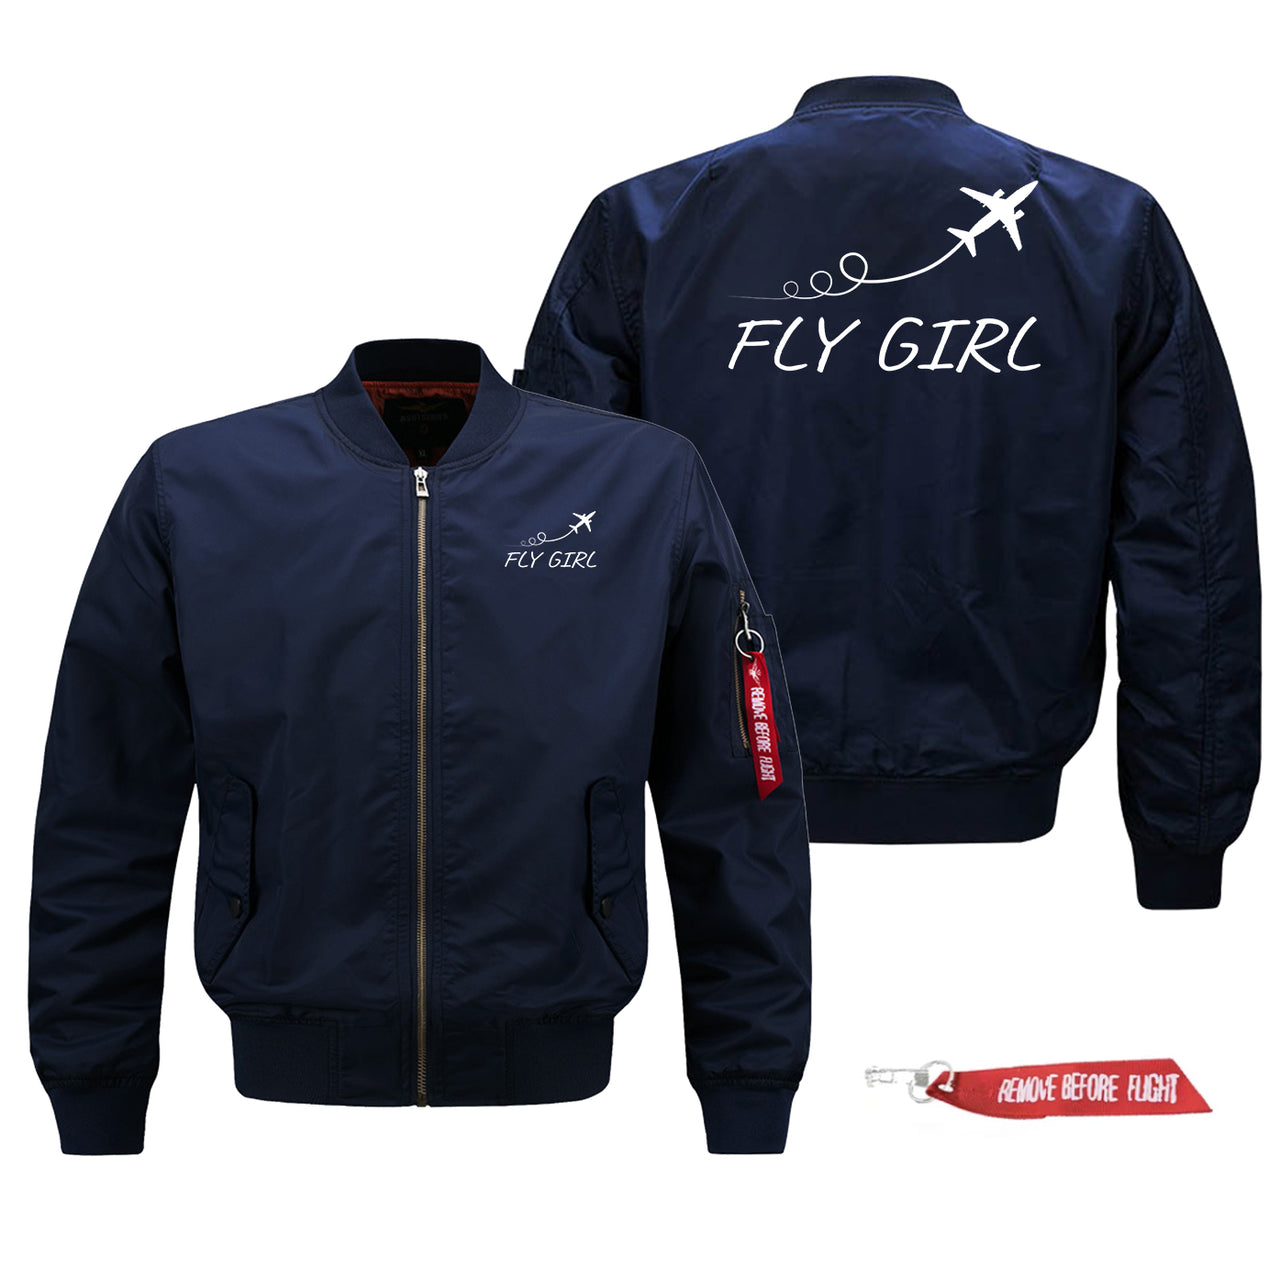 Just Fly It & Fly Girl Designed Pilot Jackets (Customizable)